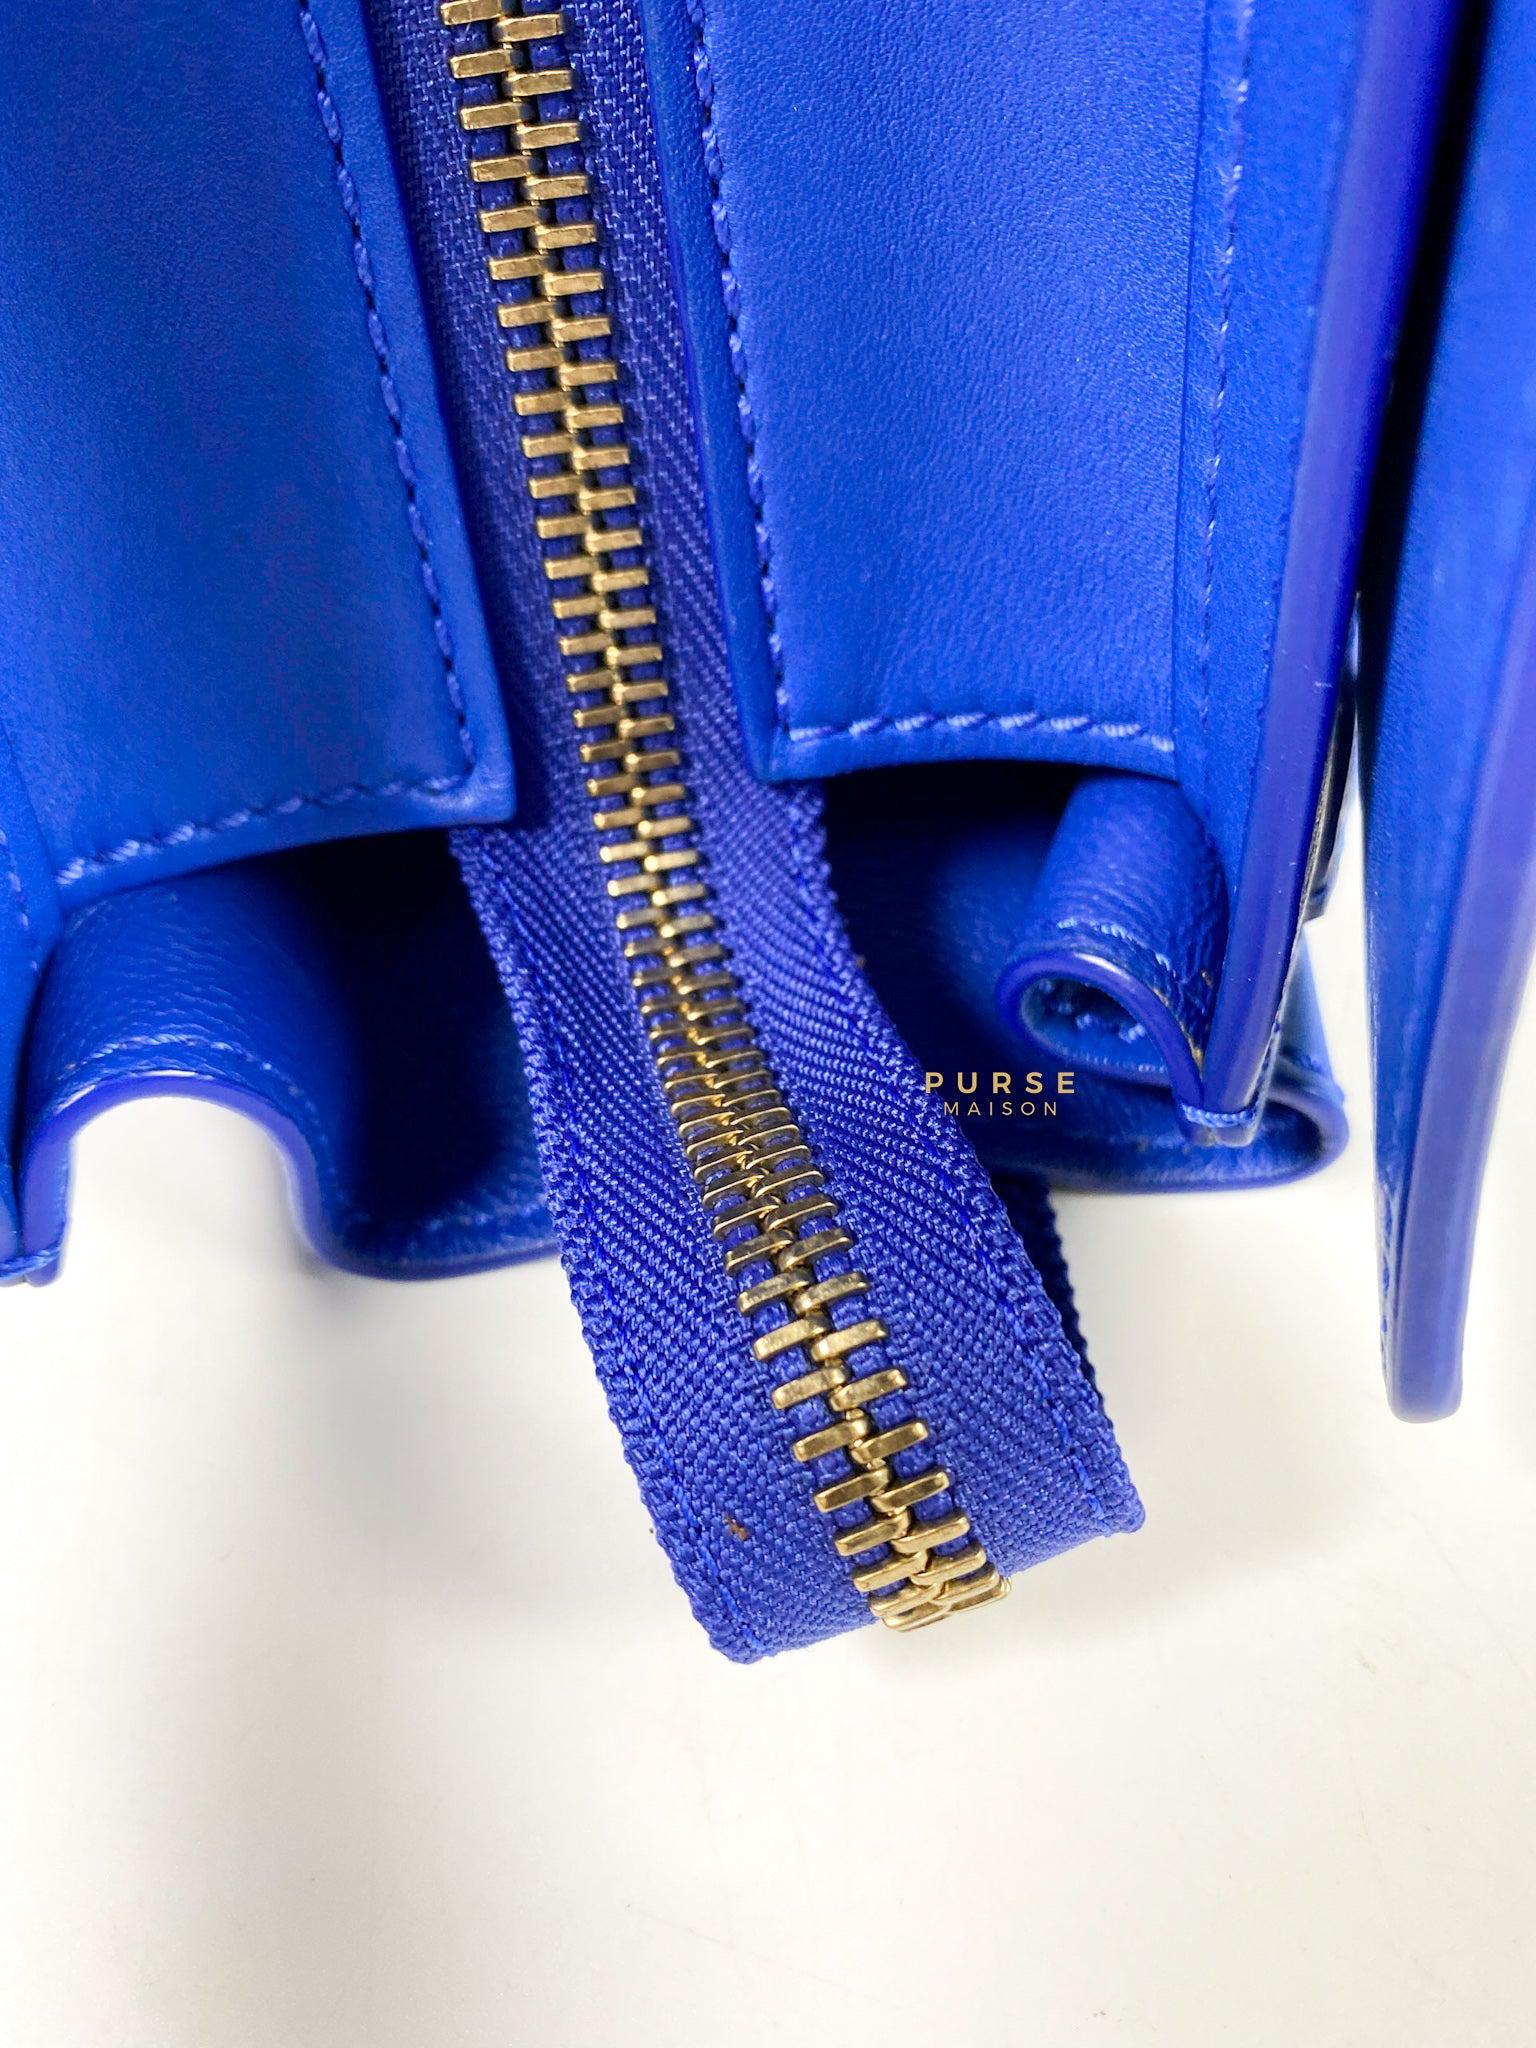 Celine Royal Blue Smooth Calfskin Leather Micro Luggage Tote Bag